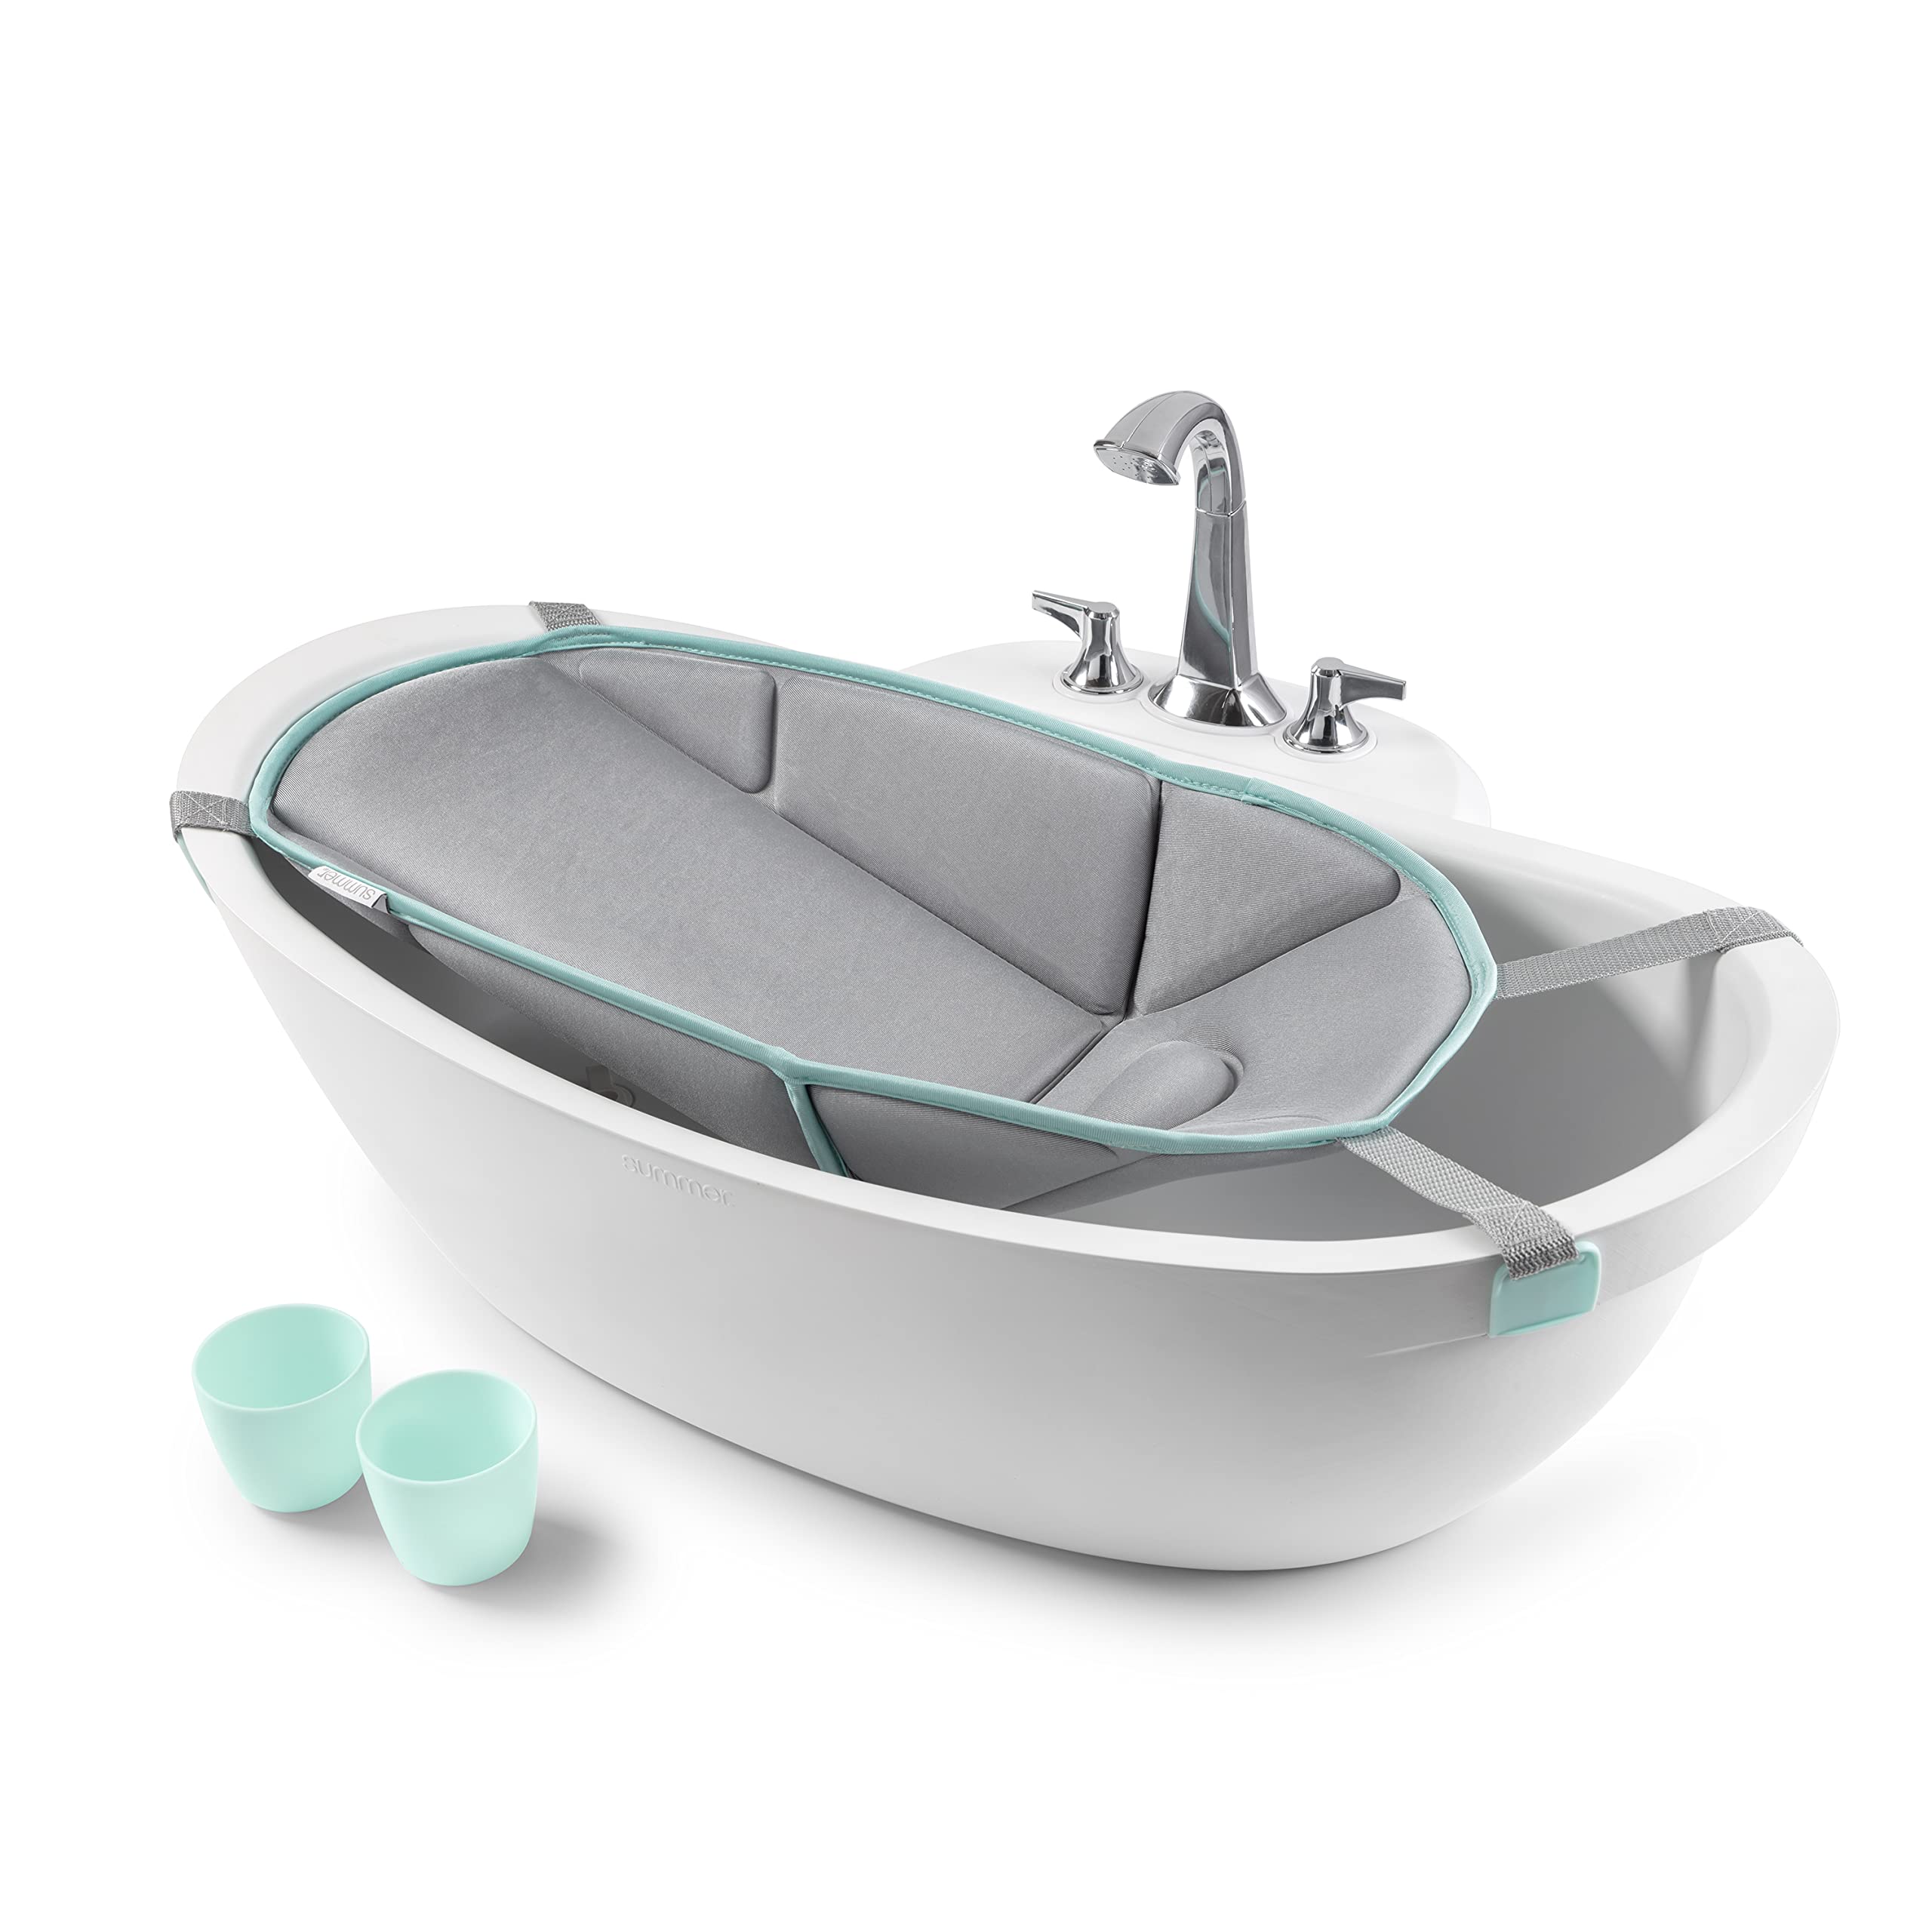 Summer Infant SummerA My SizeA Tub 4-in-1 Modern Bathing System -- for Ages 0-24 Months - Baby Bathtub Includes Soft Support, Pull-Down Spraye